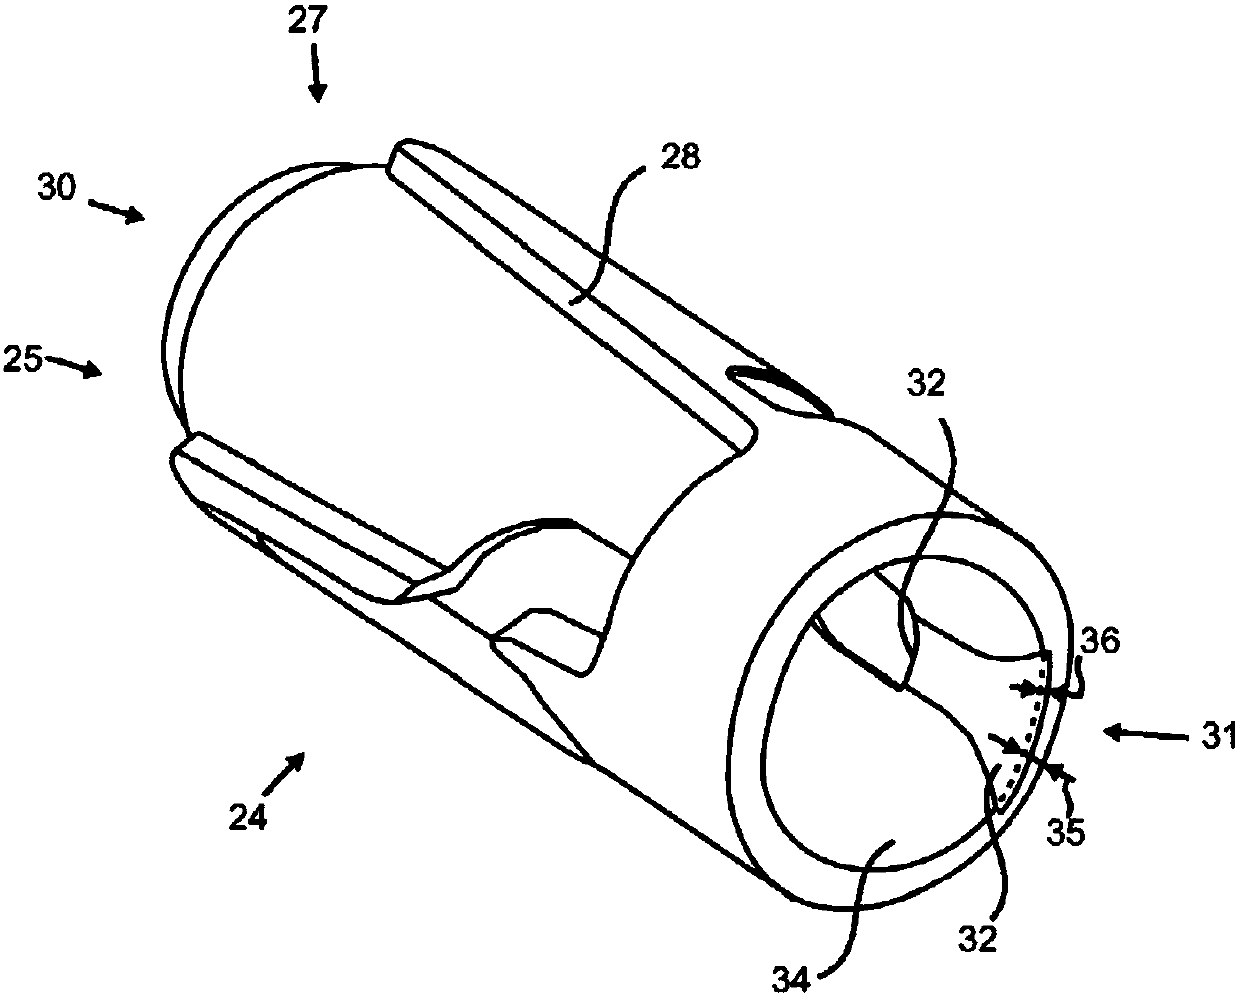 Safety device for prefilled syringes, comprising Anti-triggering mechanism